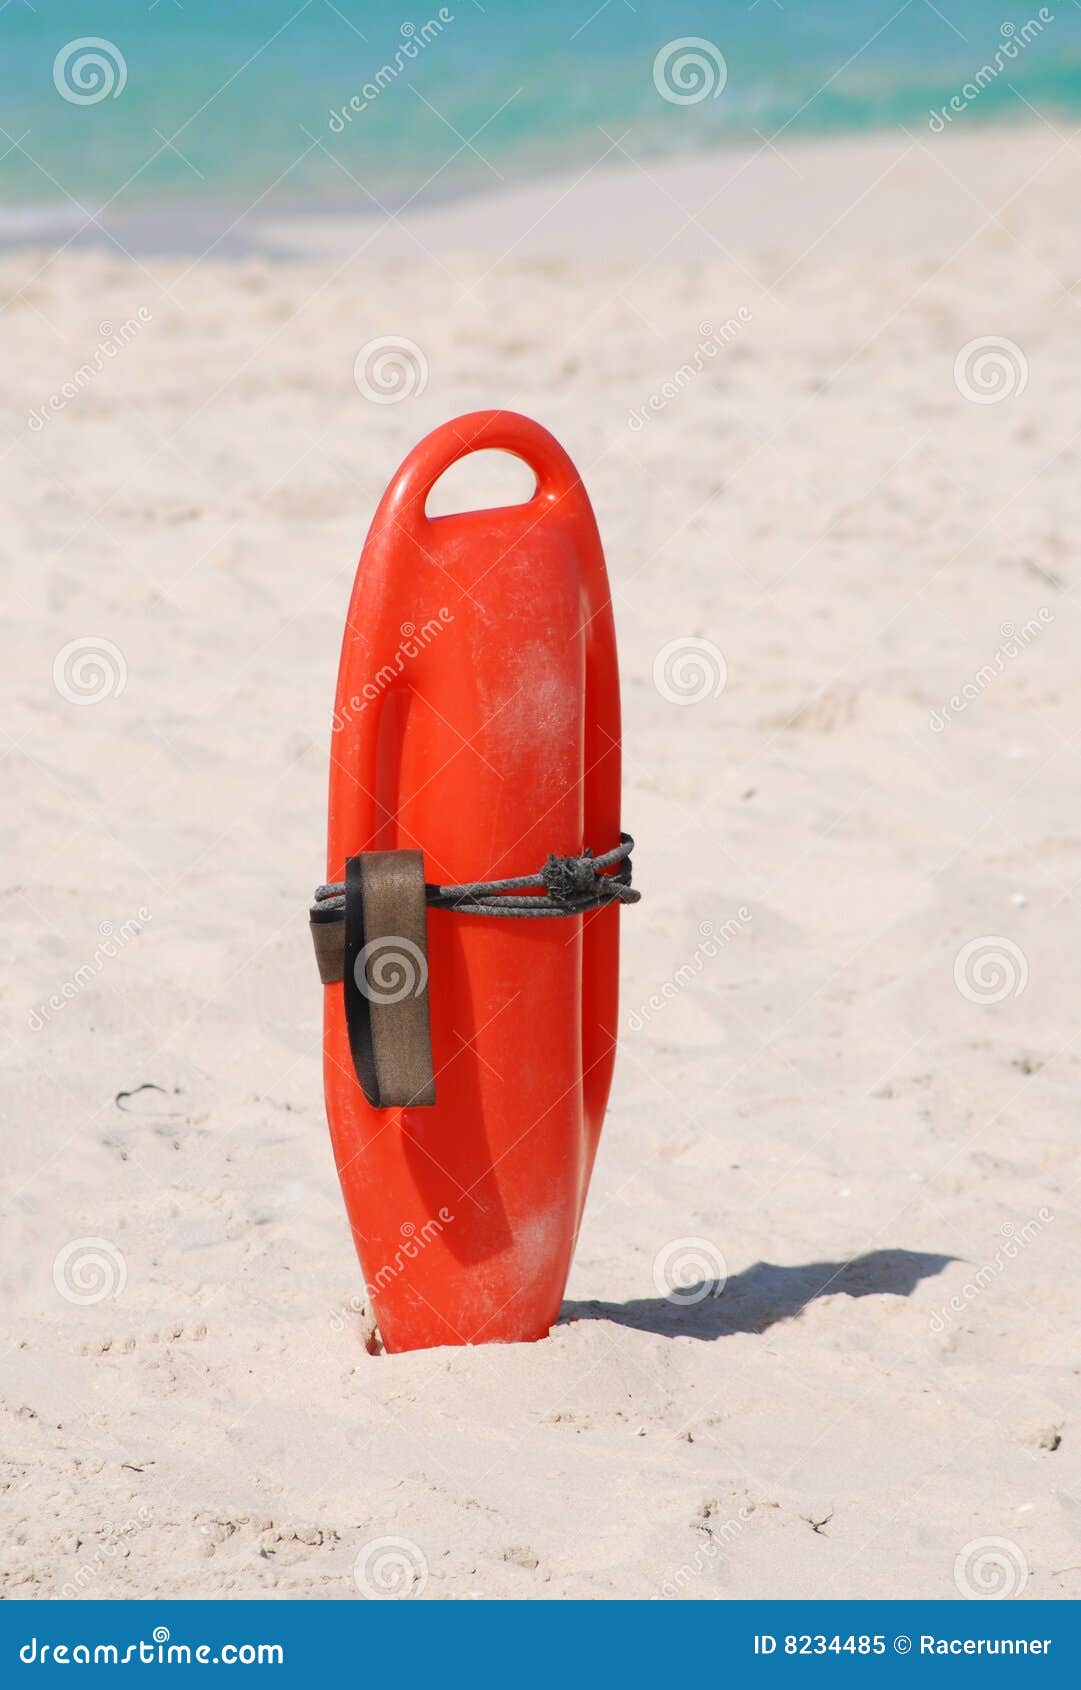 lifeguard buoyancy aid sticking in the sand